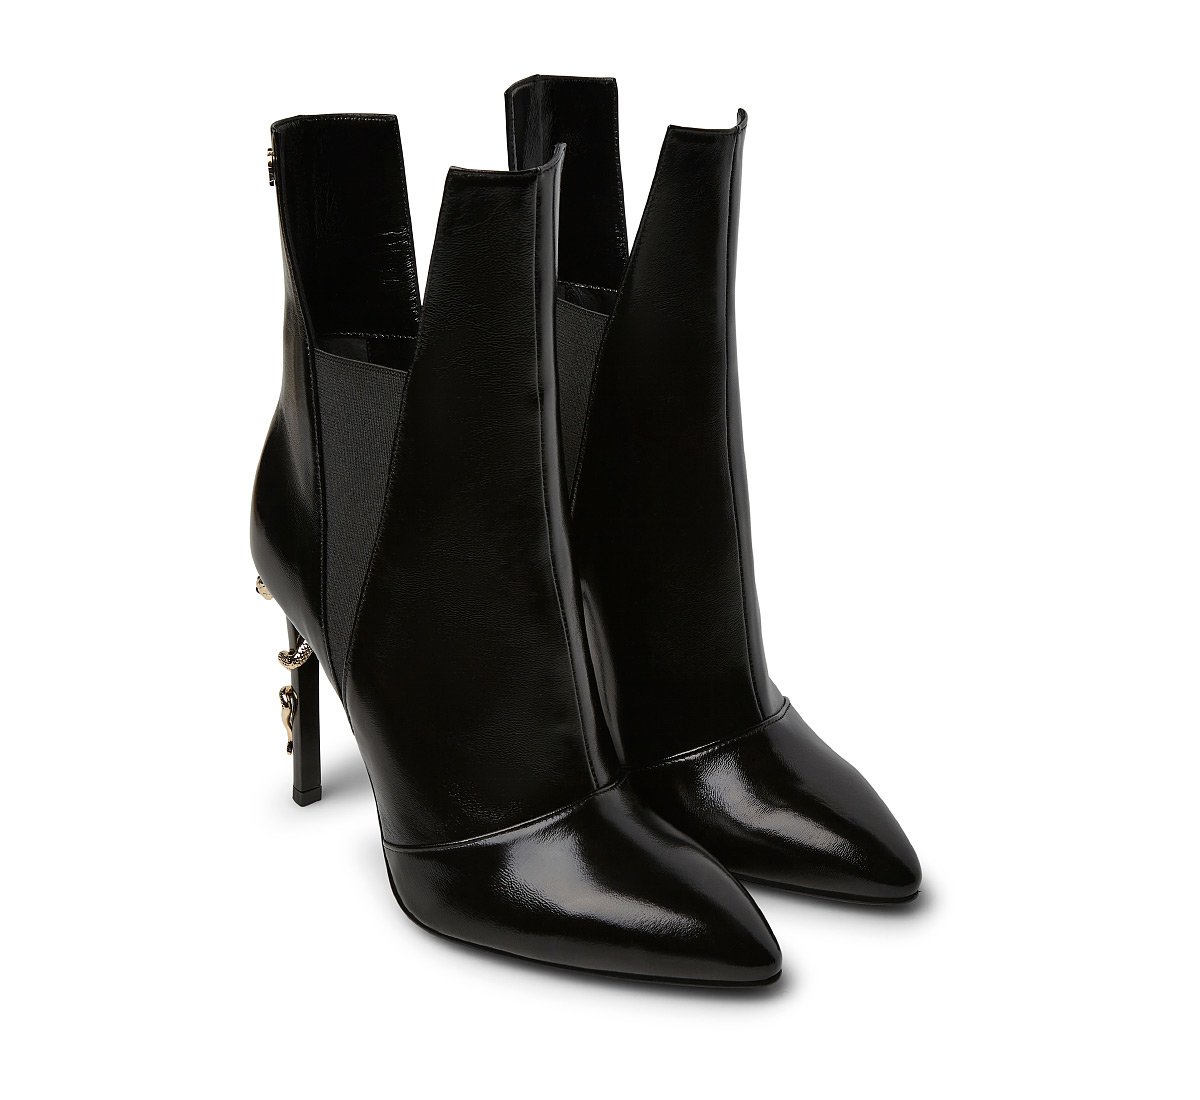 Fabi ankle boot